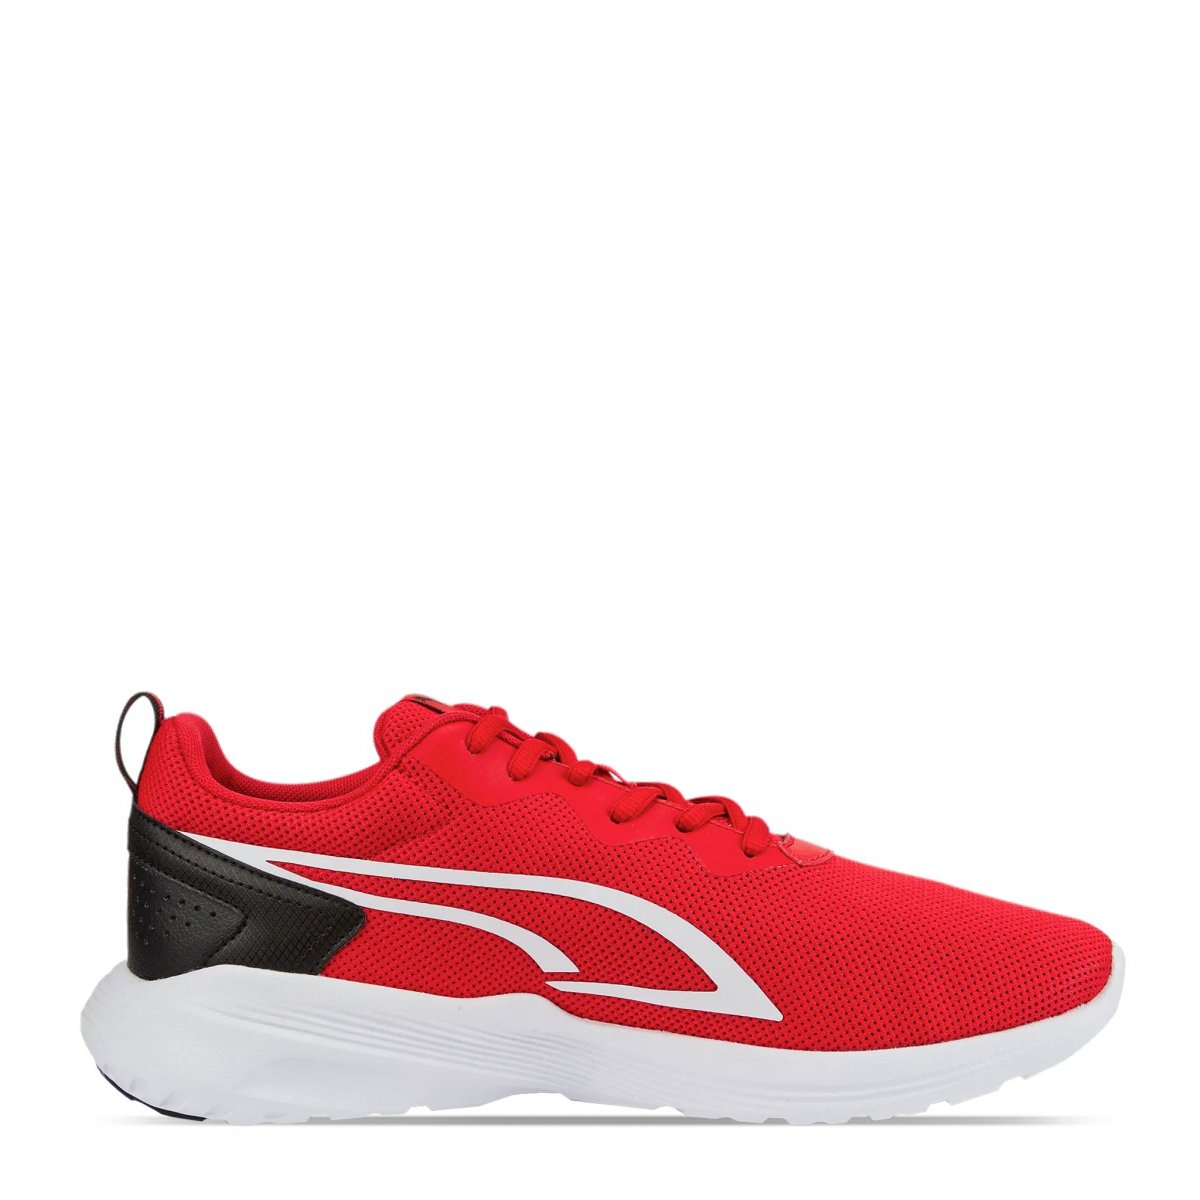 Tenis Puma All Day Active